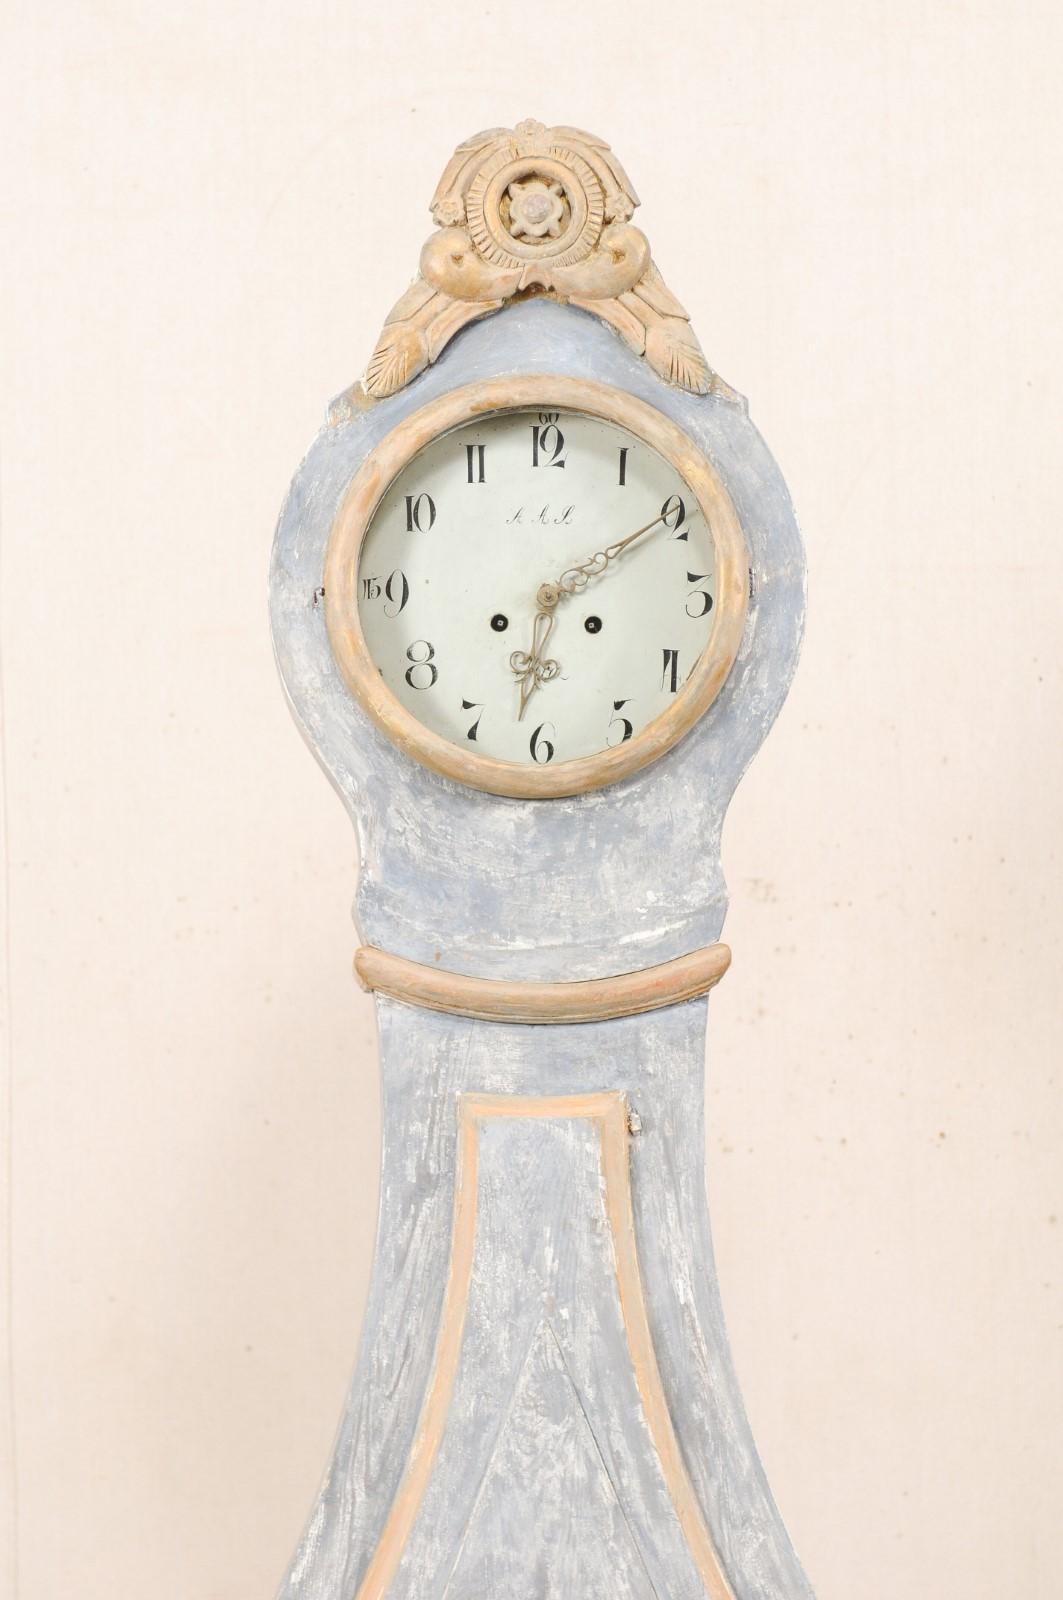 Handsome Early 19th Century Swedish Clock in a Soothing Blue/Gray Palette 1